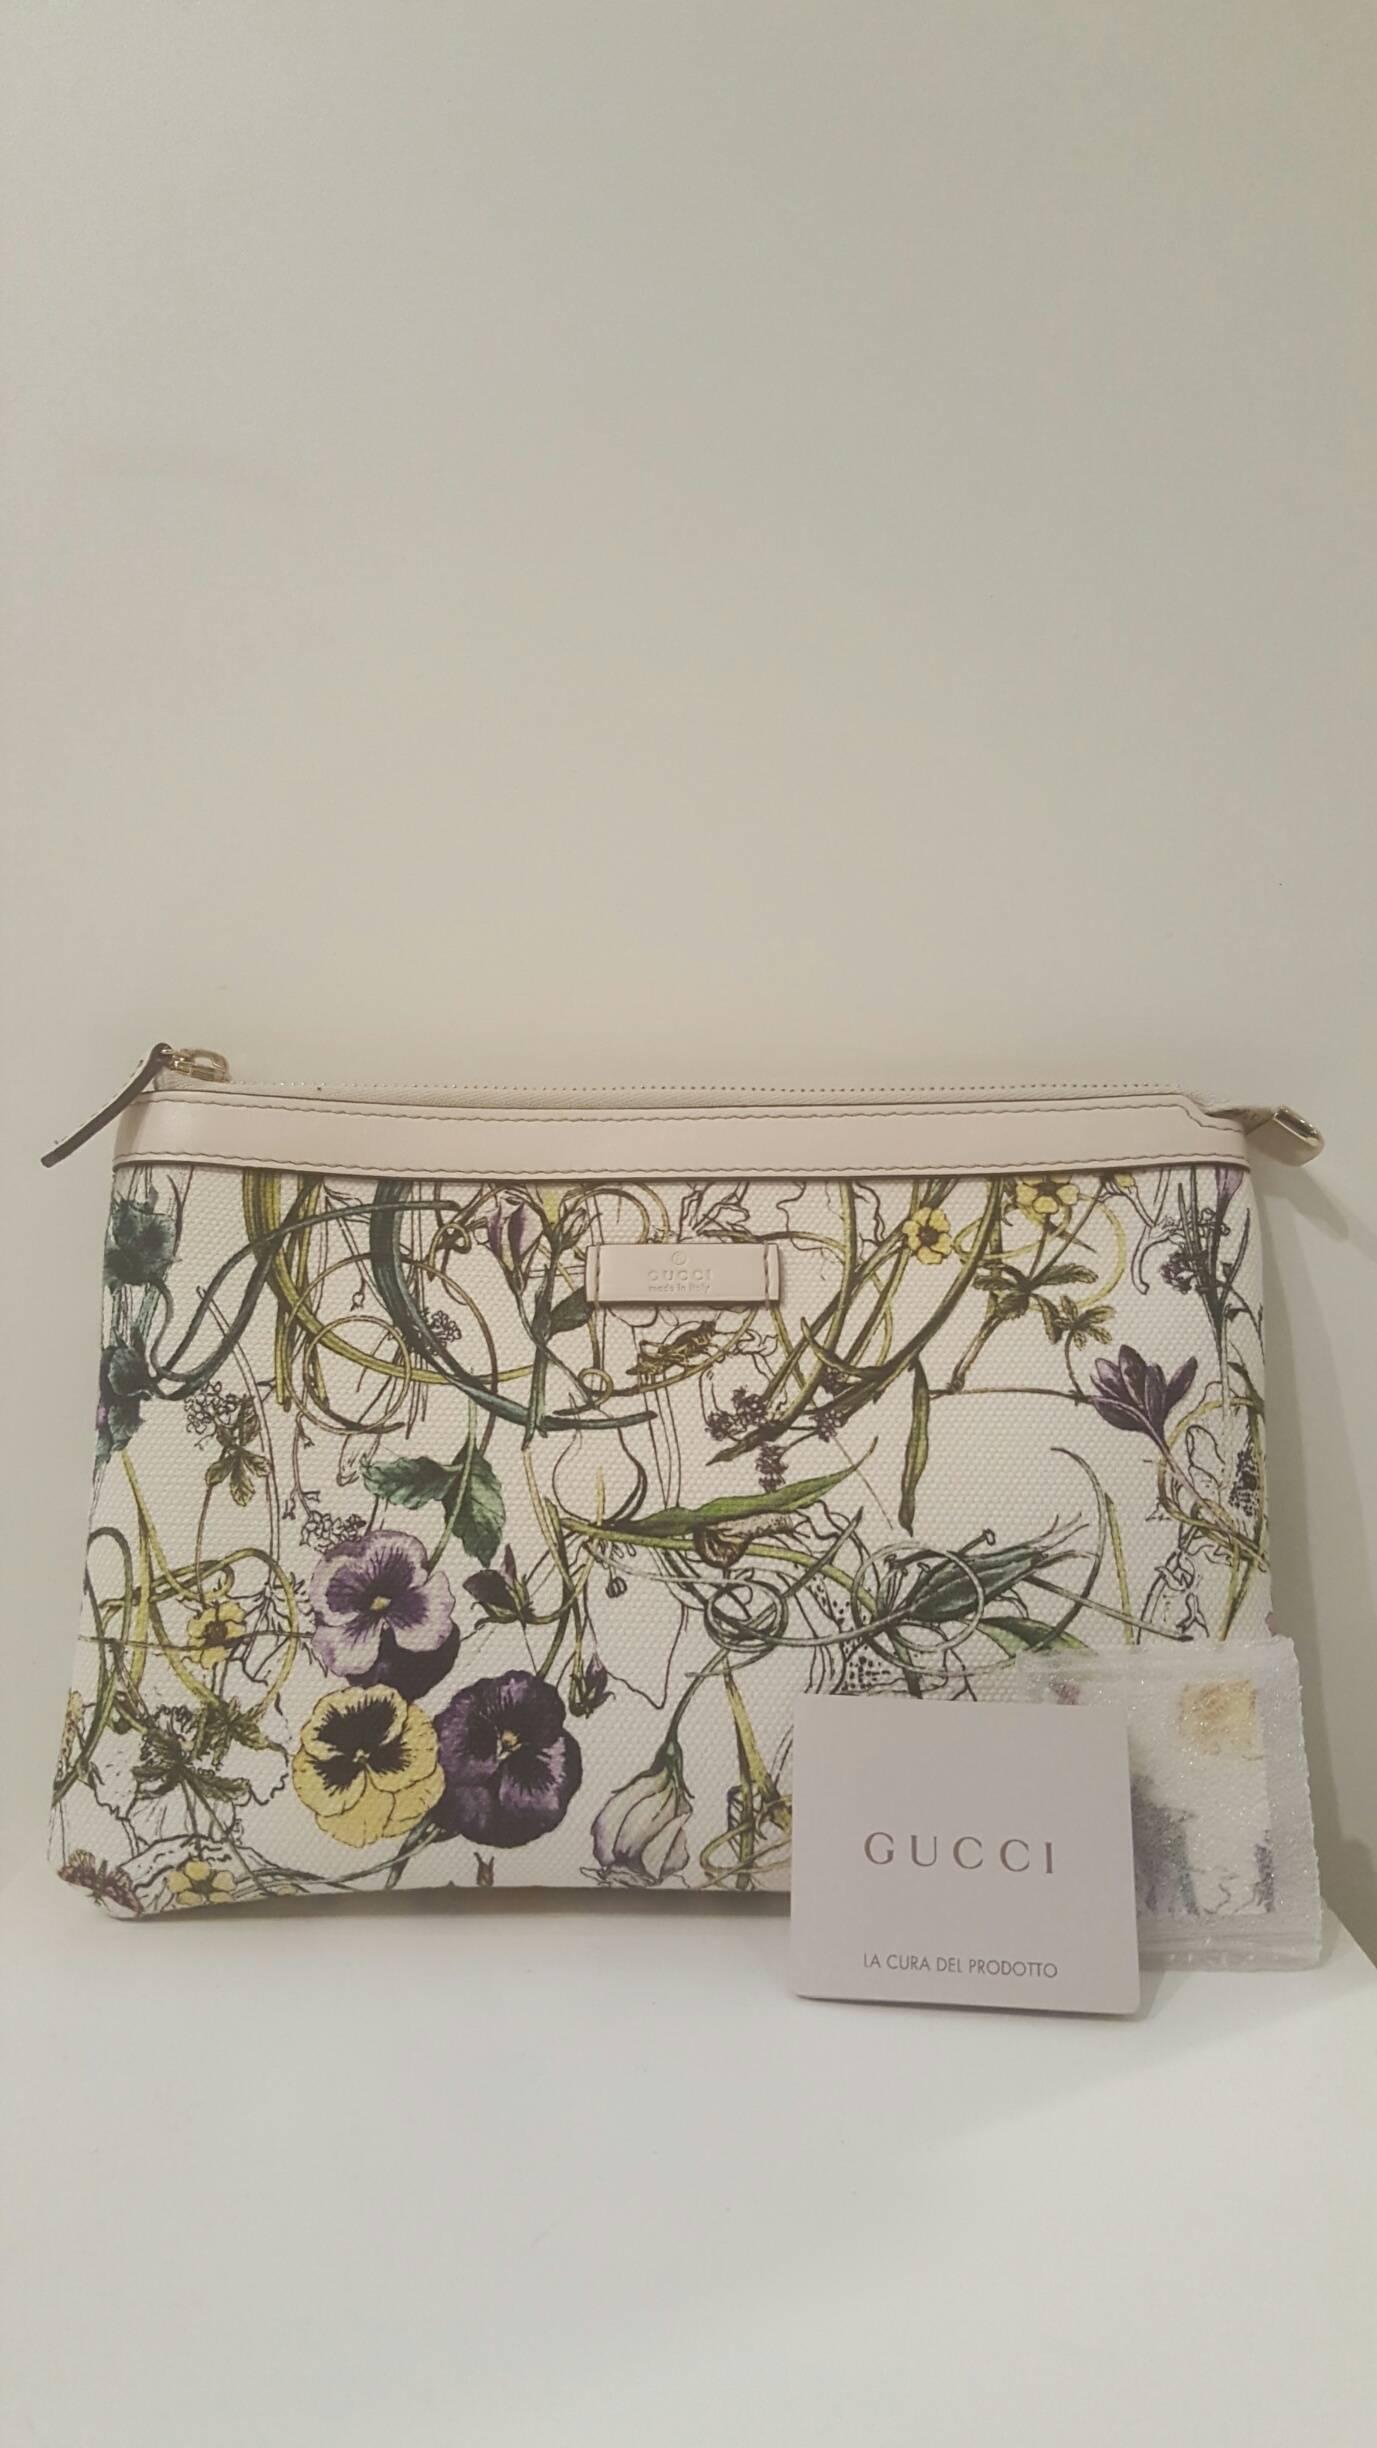 2000s Gucci Flora white pochette Never used still with tags and dust bag